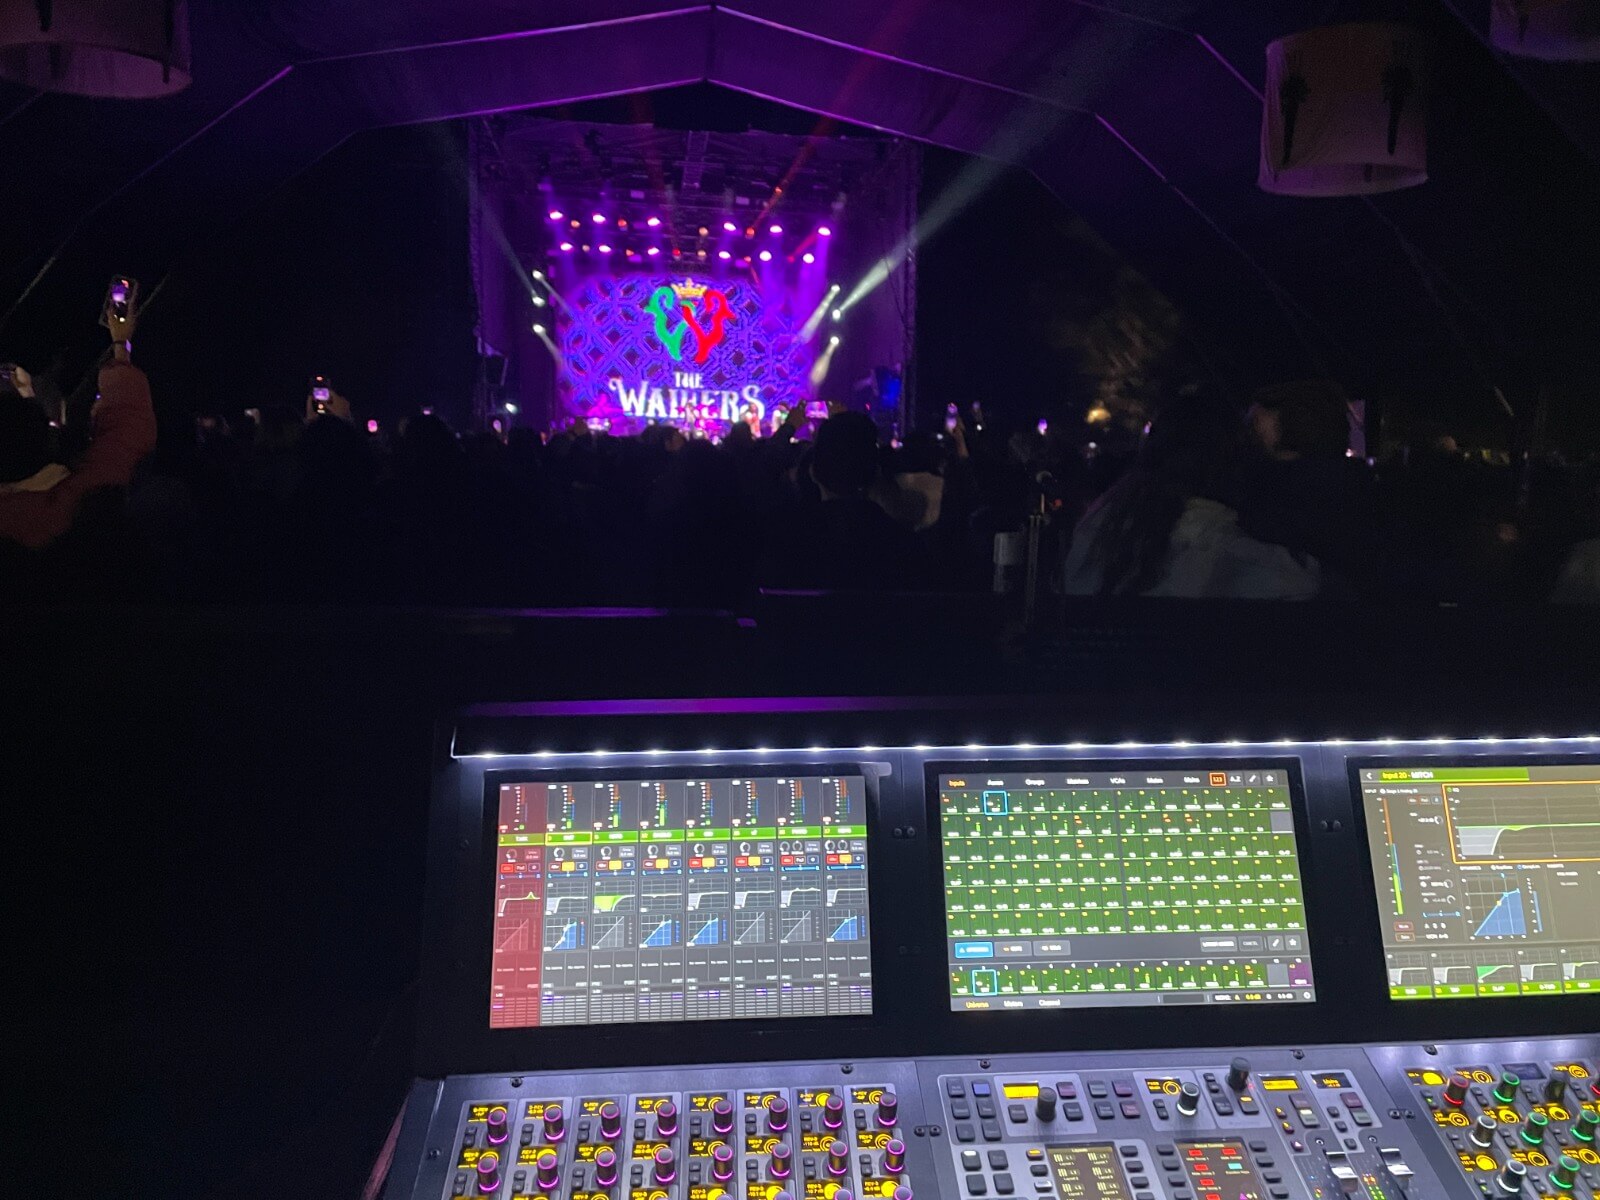 Interview with Christian Cowlin: FOH & Sound Engineer for The Wailers